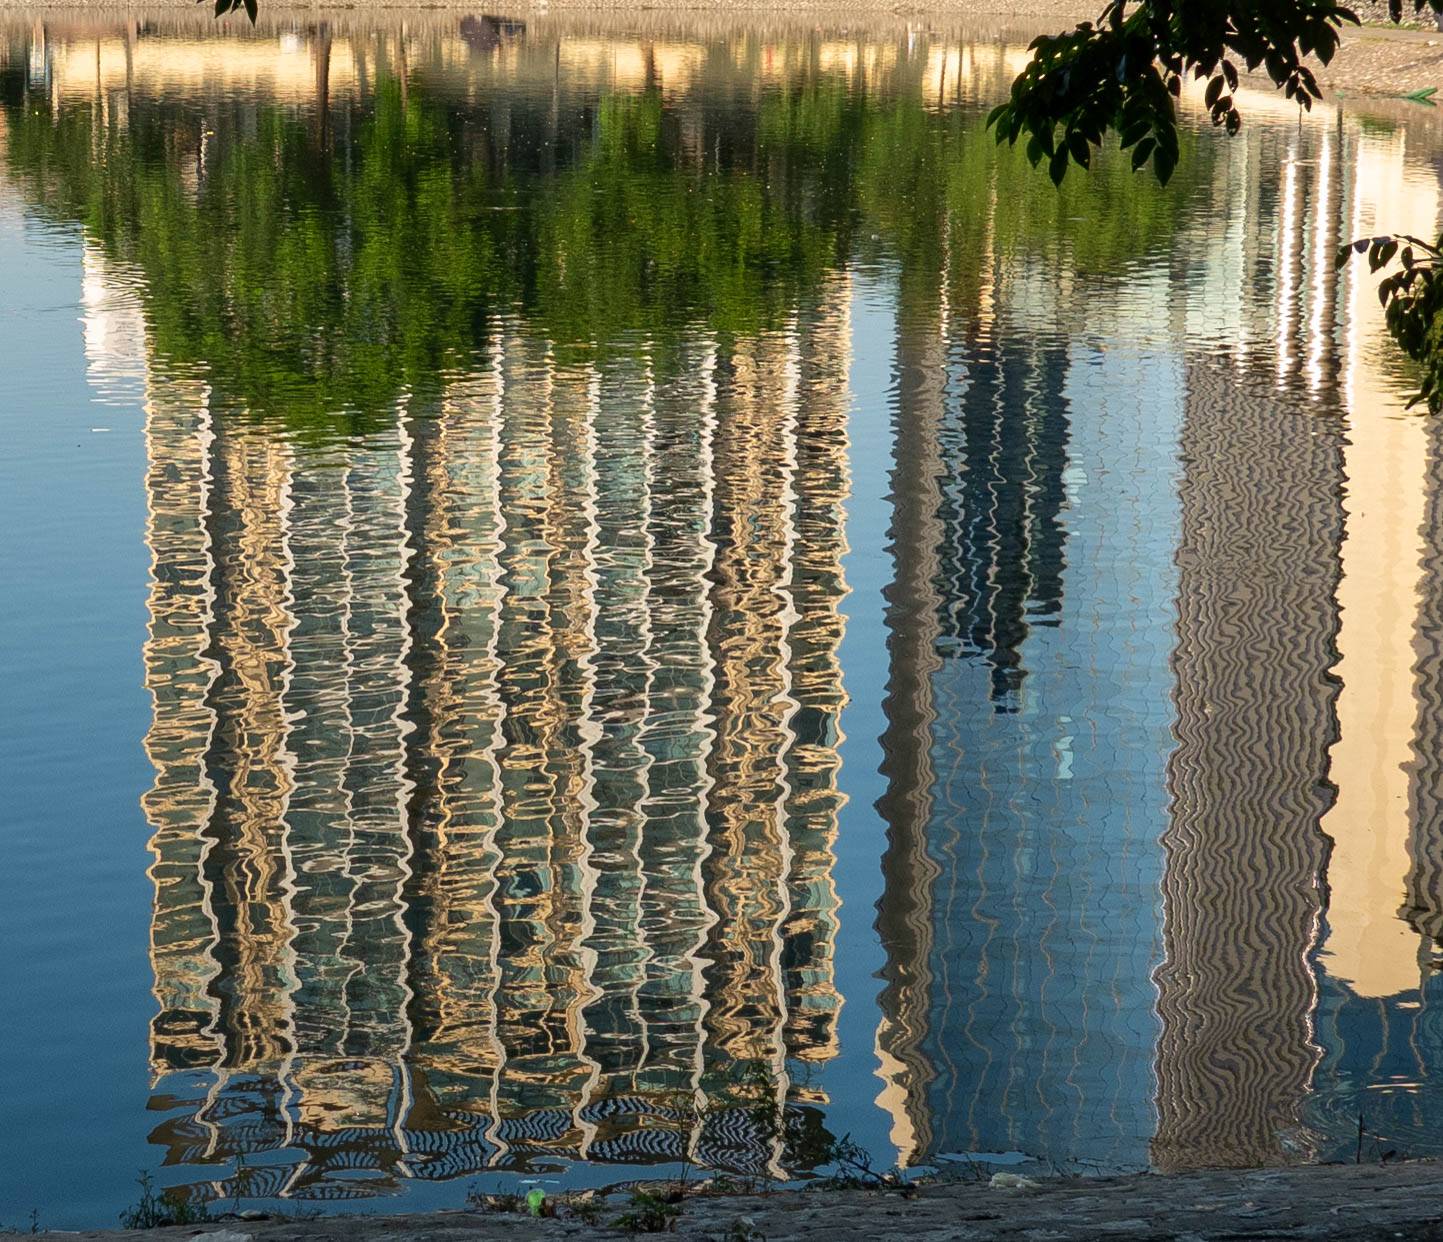 Reflection of building in lake distored by ripples. 